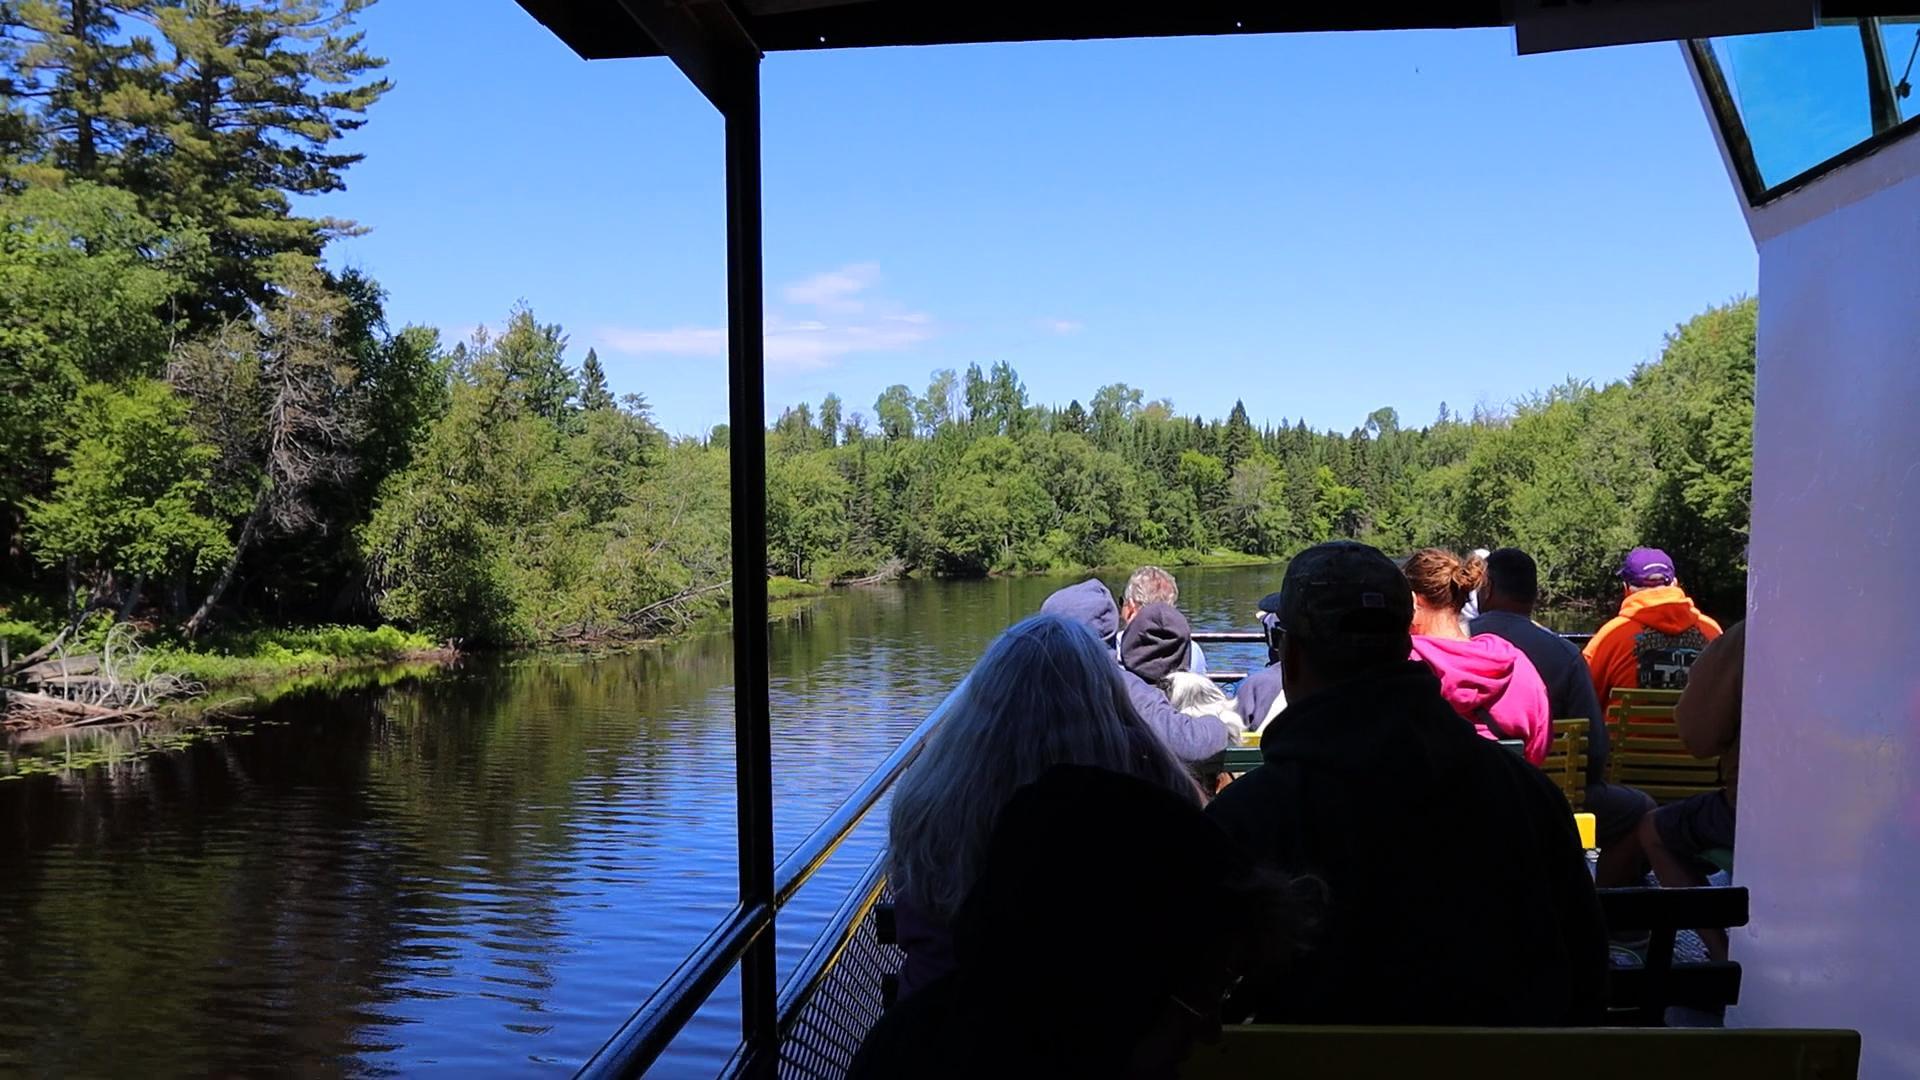 Passengers aboard the Riverboat Tour looking out at trees.